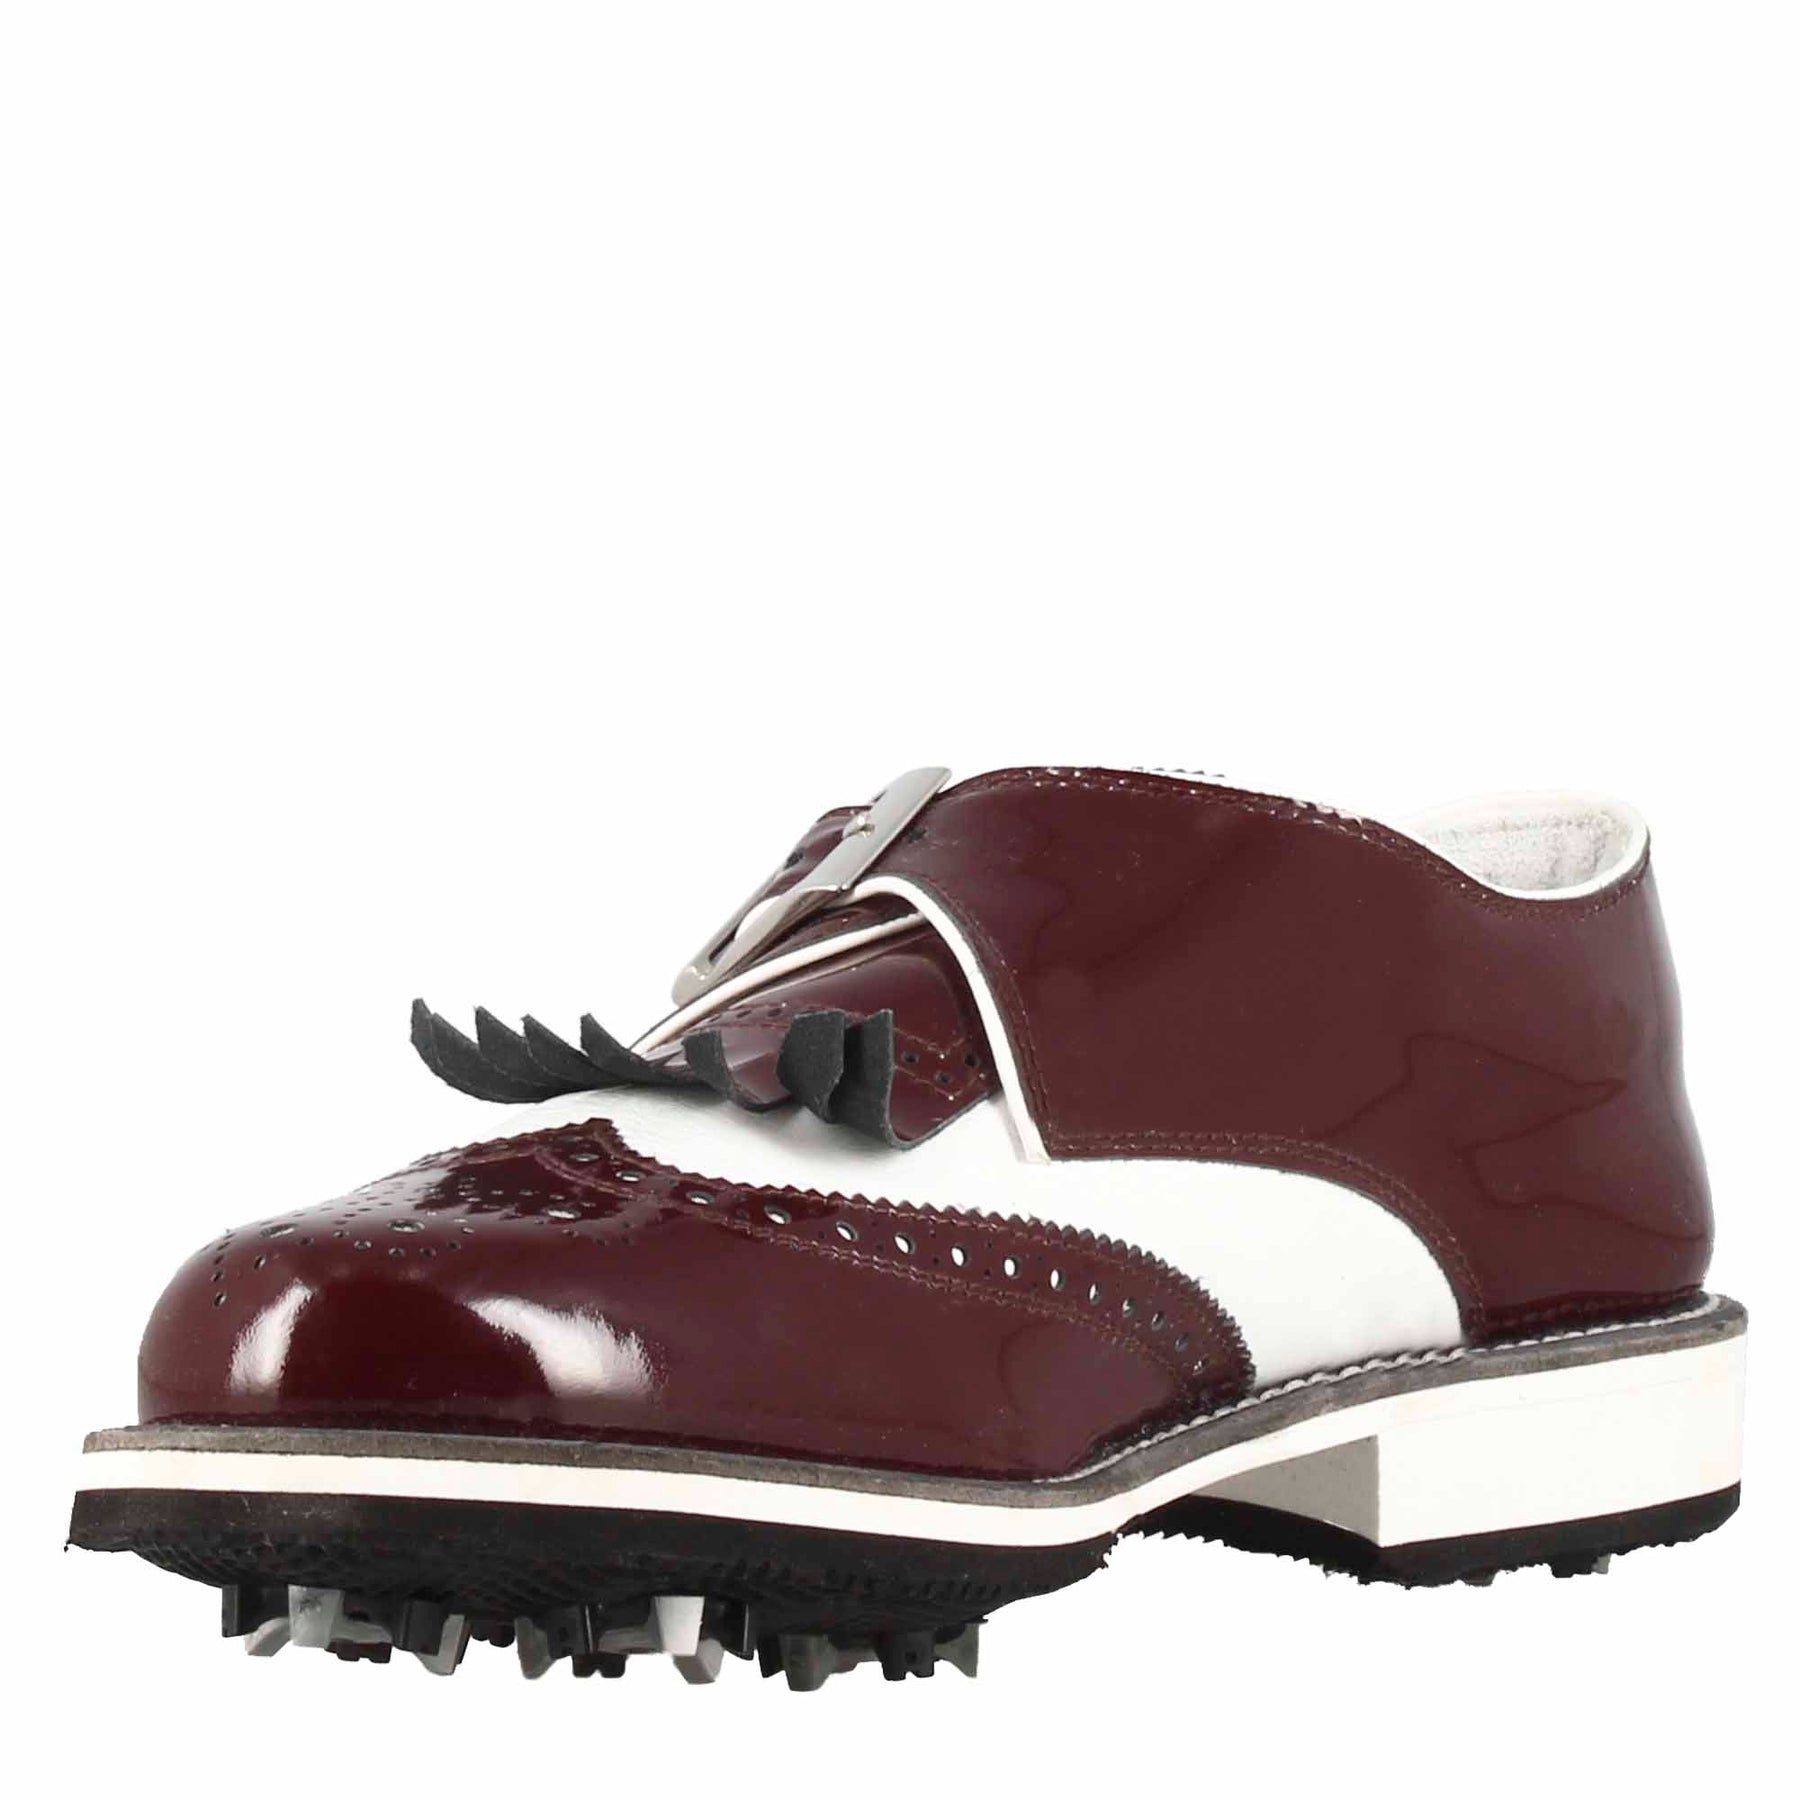 White leather and bordeaux patent leather men's golf buckle shoes